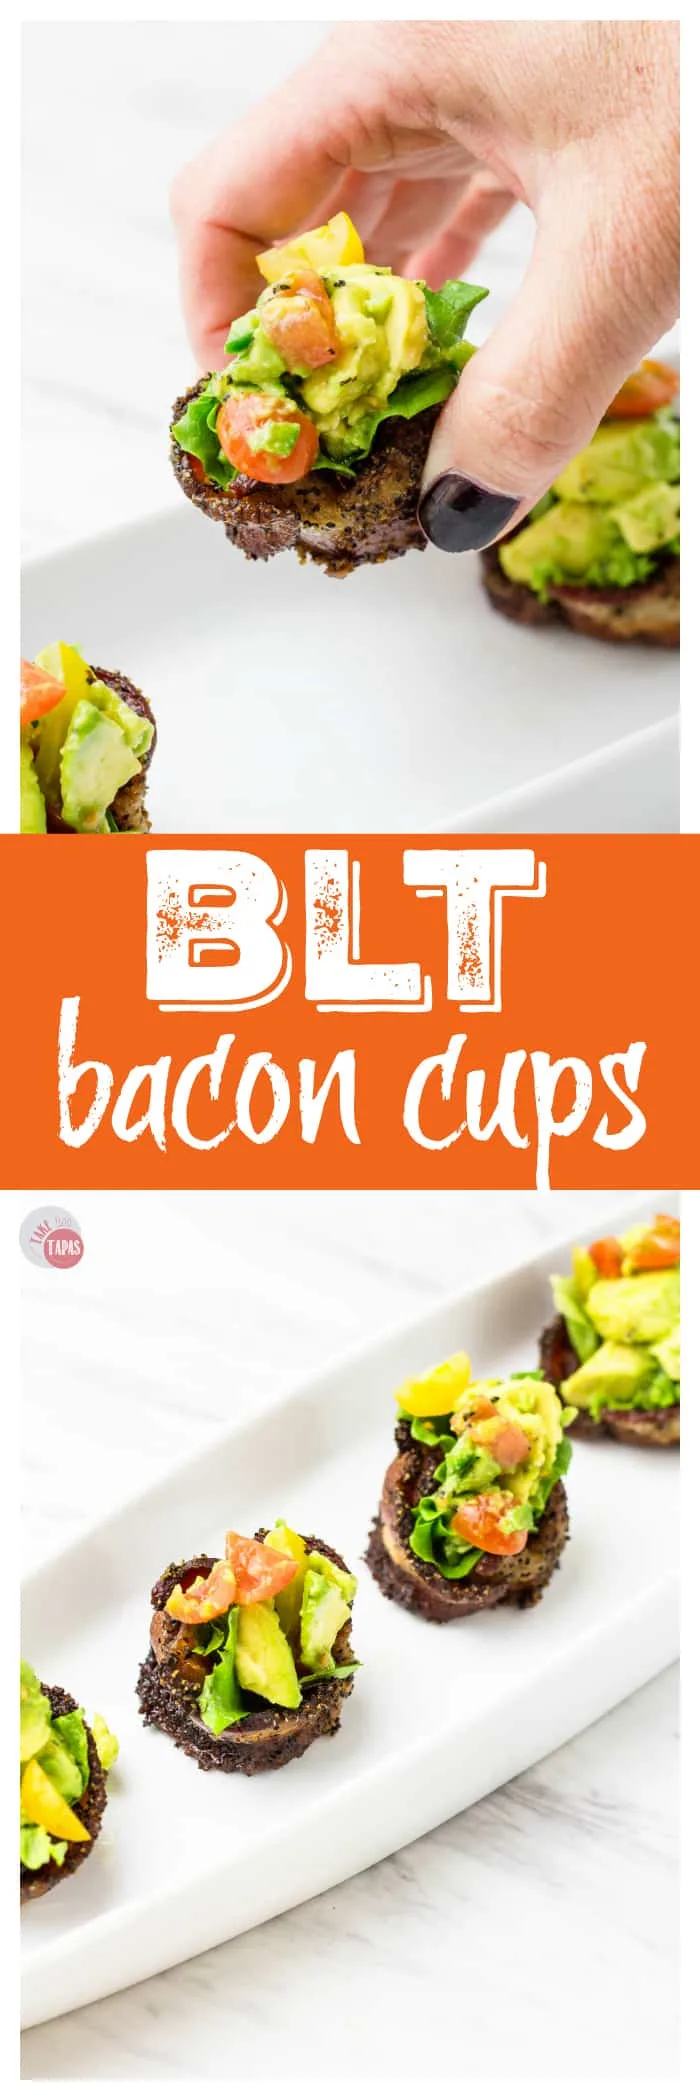 Pinterest collage with text "BLT bacon cups"